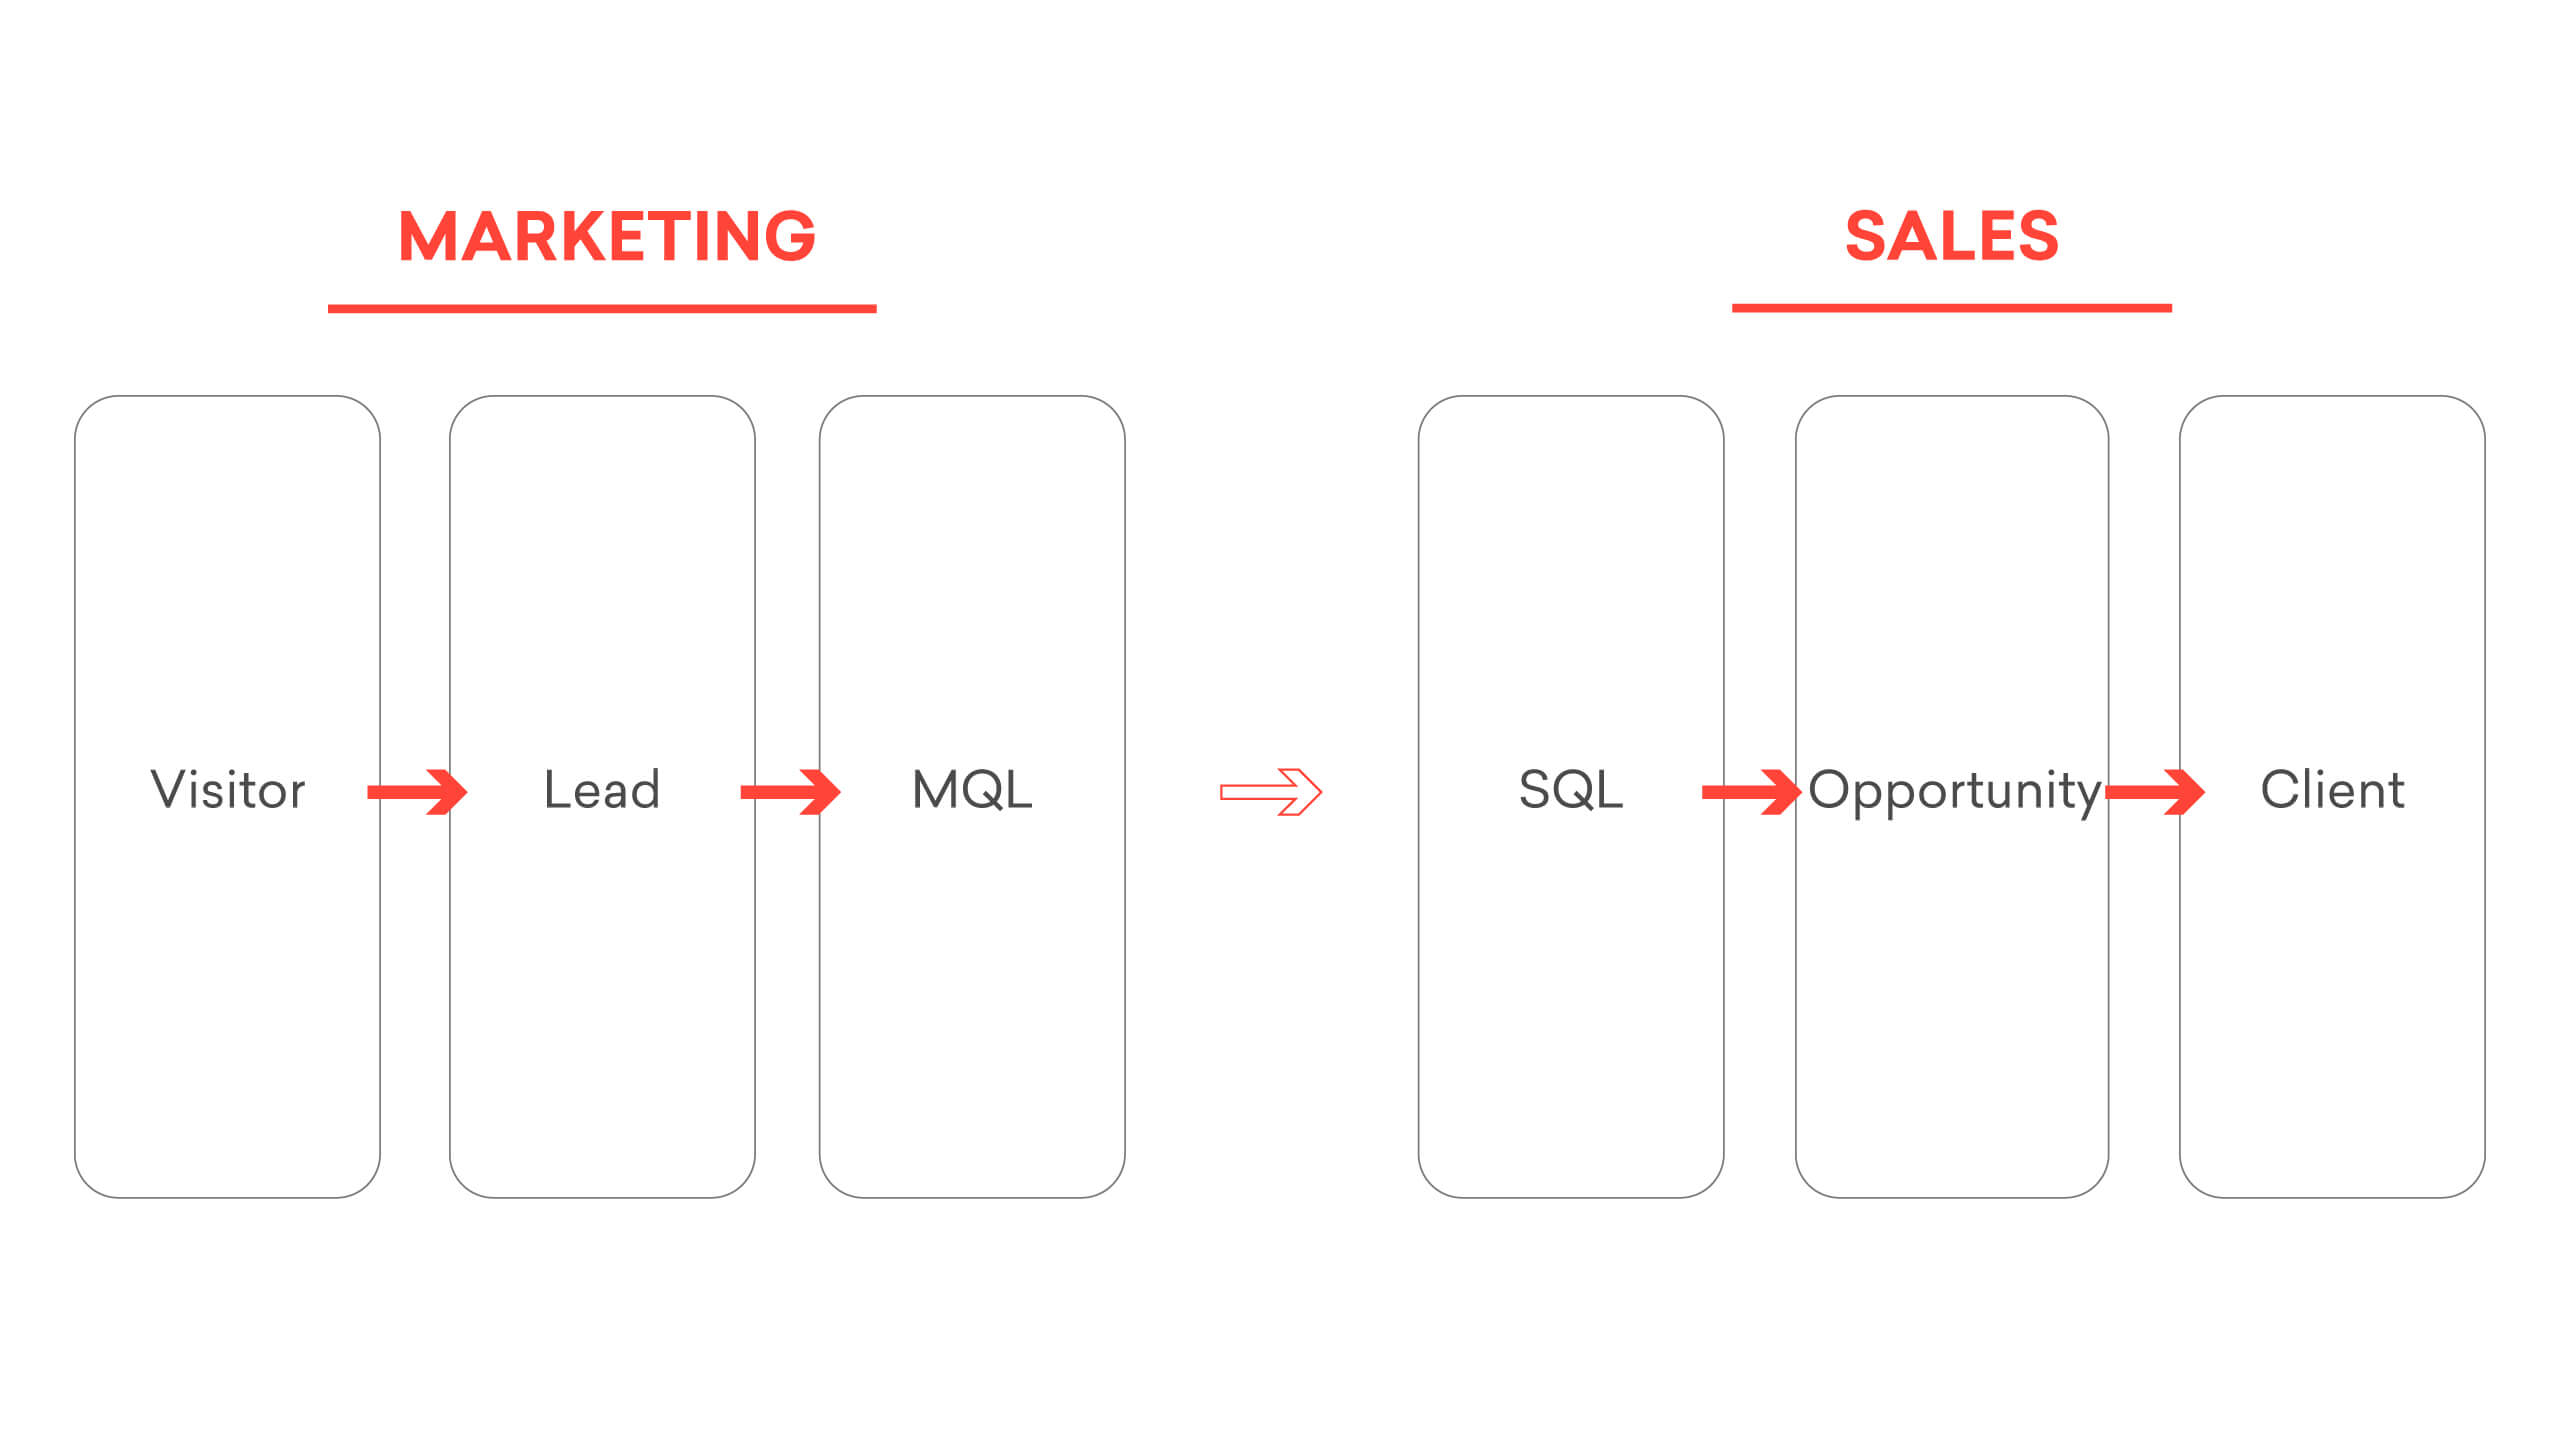 Leads go through the marketing and sales funnel 